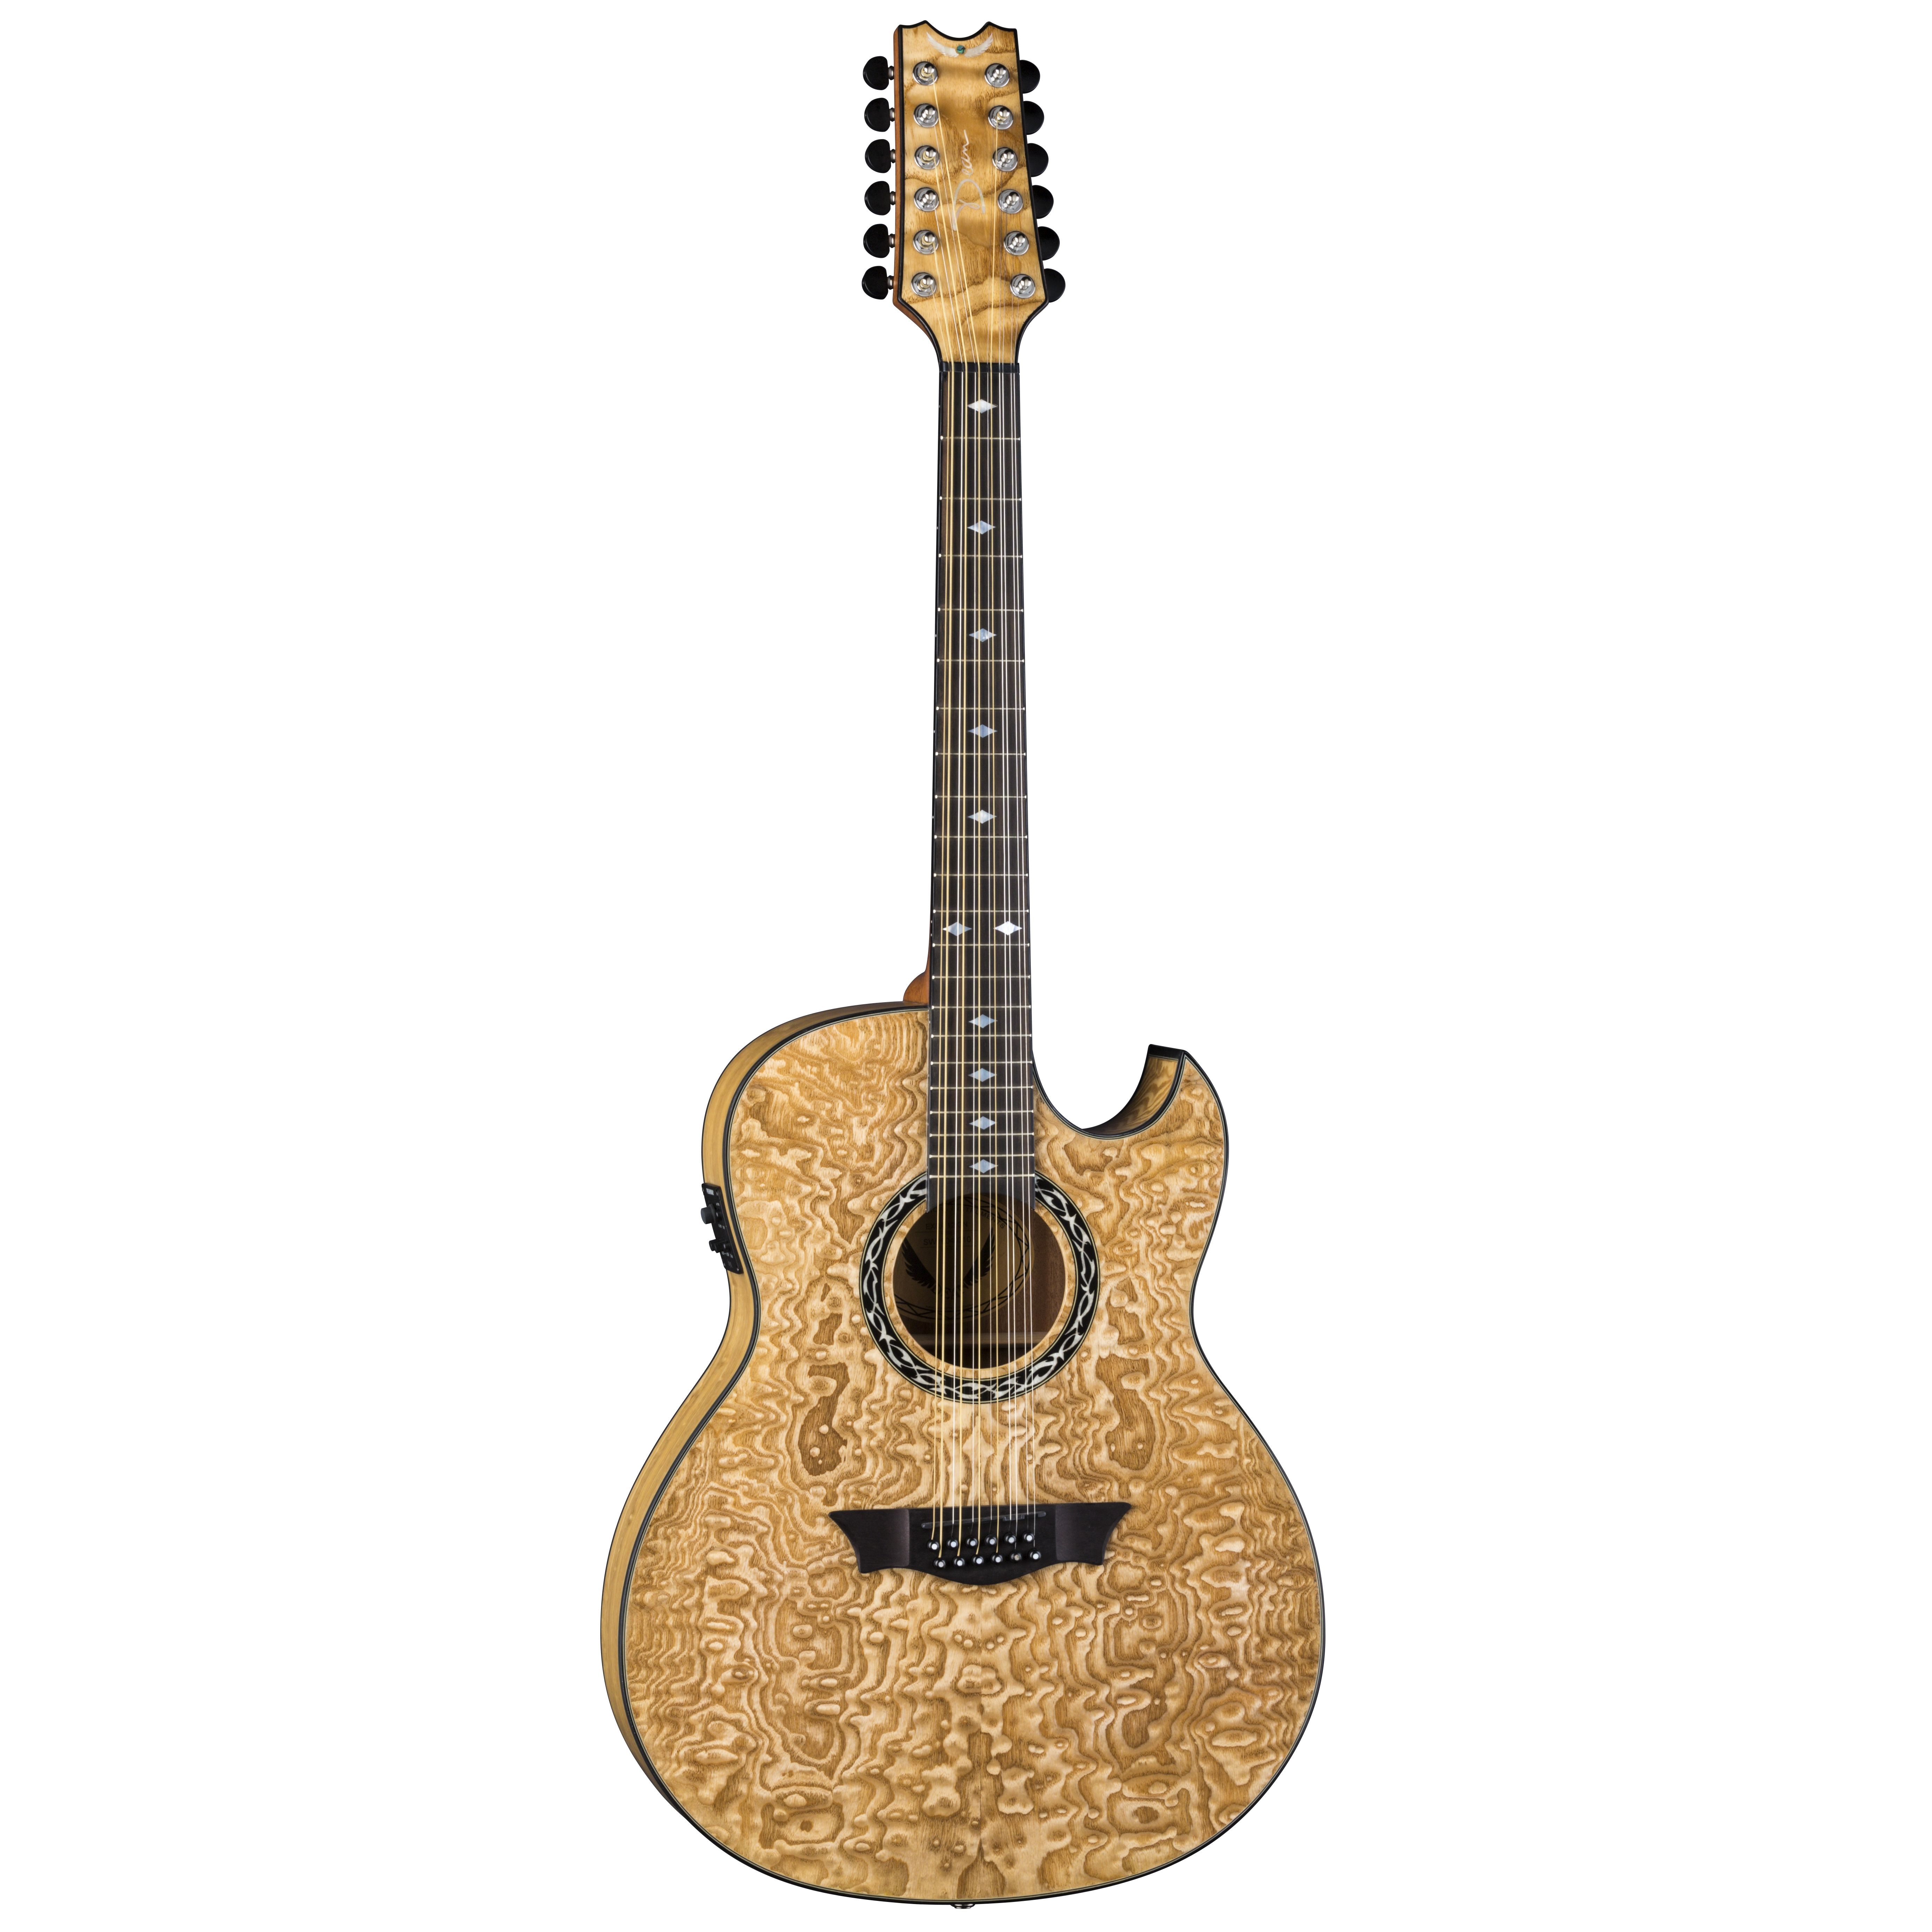 https://www.studiogears.com/media/catalog/product/cache/5b3896089b71517fc6a776da0af3e334/image/70837ff5/dean-exhibition-quilt-ash-acoustic-electric-12-string-guitar-gn-exqa12-gn-sku-number-exqa12-gn.jpg